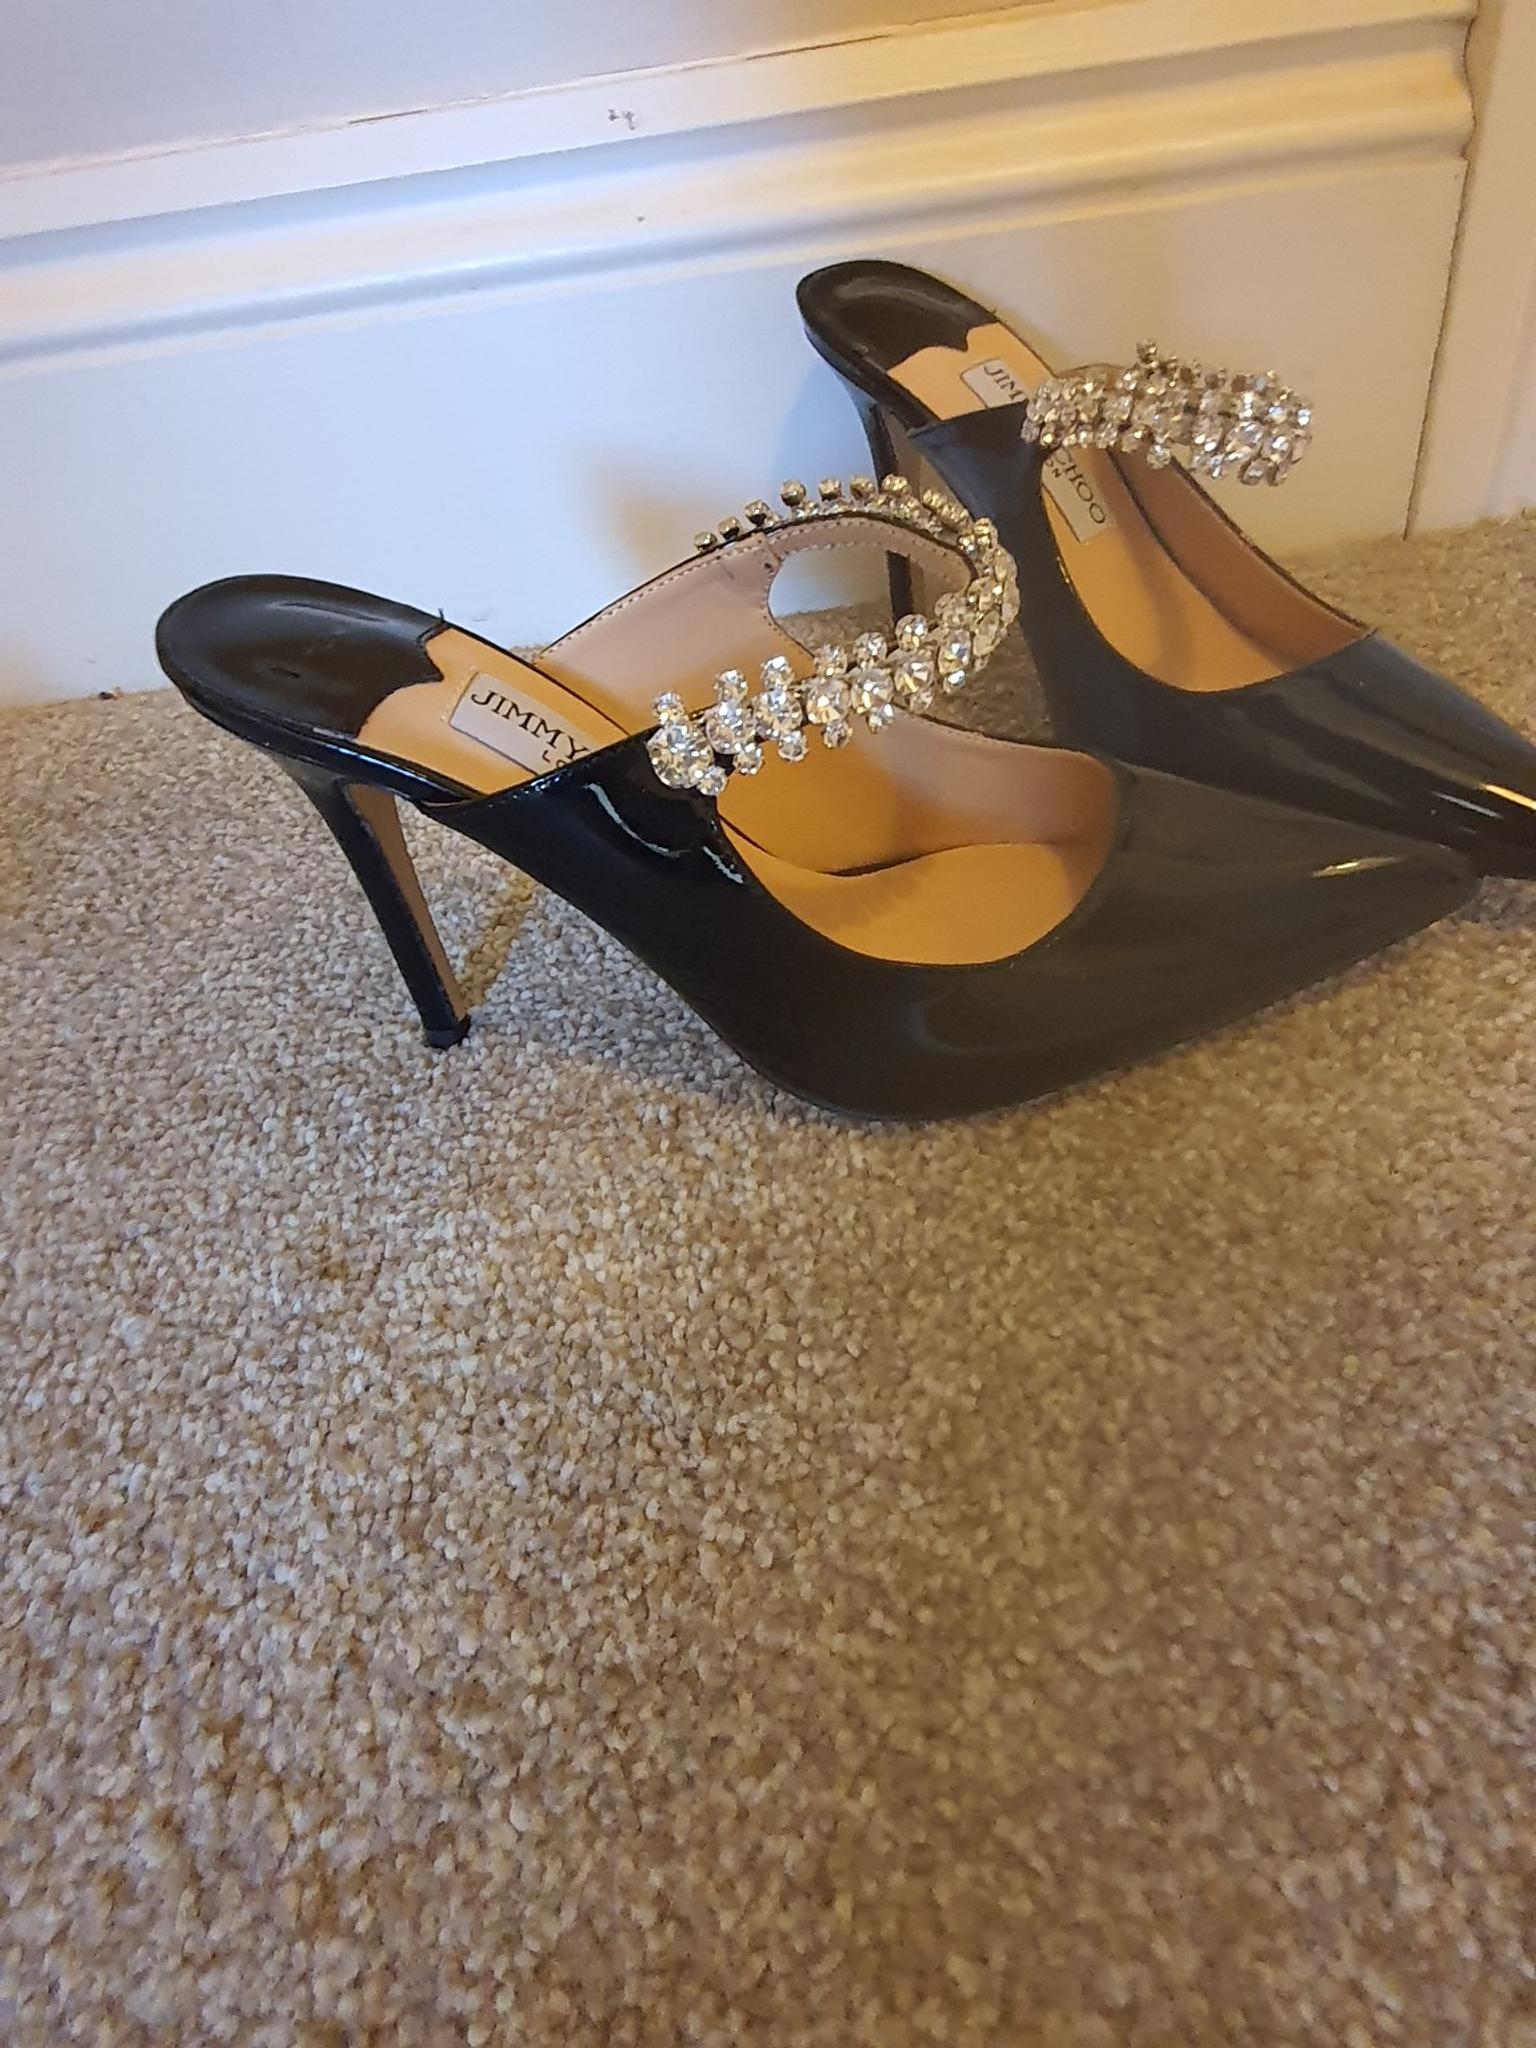 Jimmy Choo style 40 diamanté heels in for £75.00 for sale | Shpock